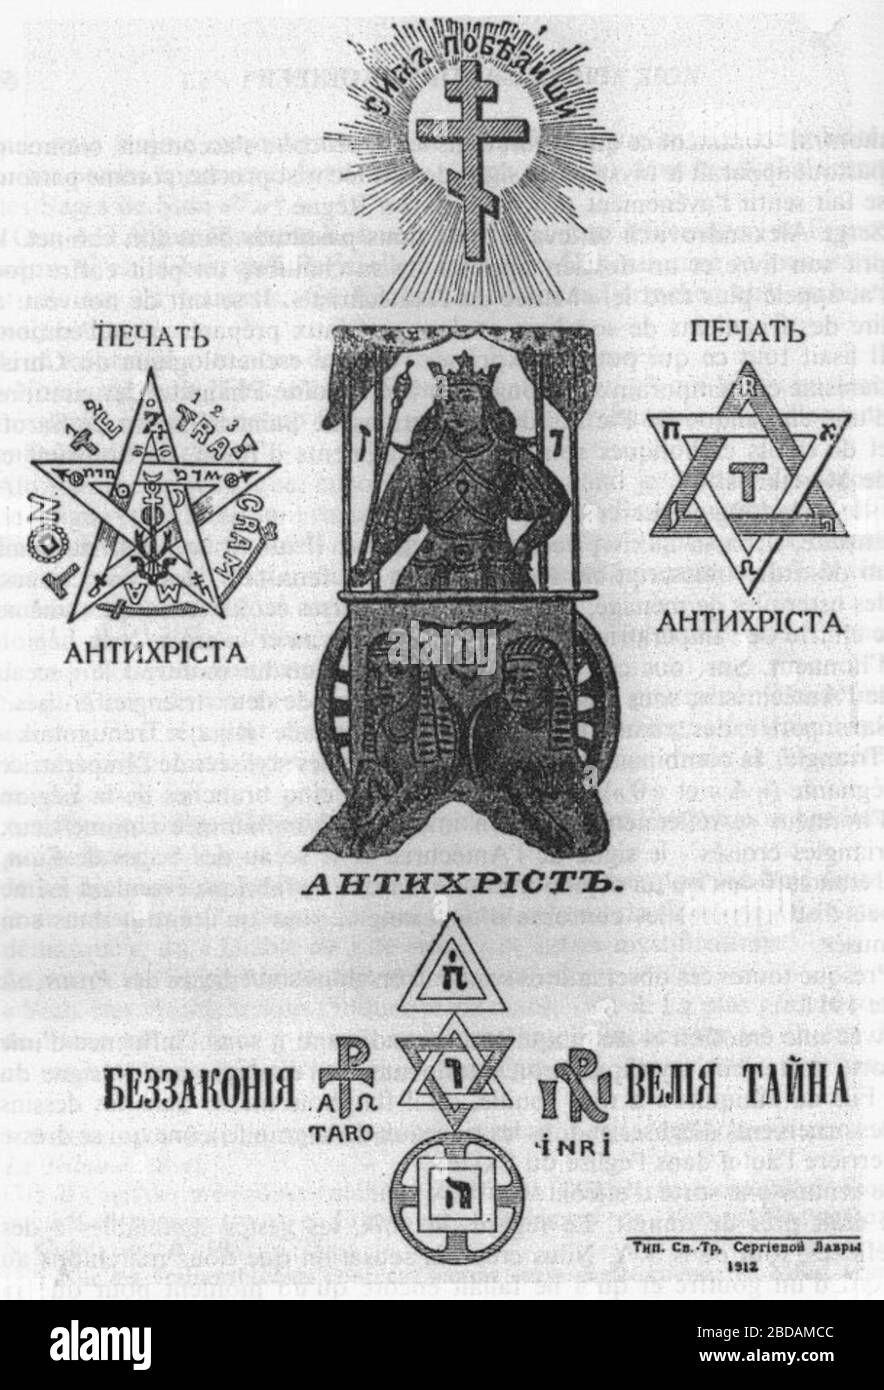 'English: Front page illustration from 1911 edition of Sergei Nilus' book The Great in the Small that contained The Protocols of the Elders of Zion. The captions (among occult symbols and the Eliphas Levi version of the Chariot Tarot card) read: Thus we shall win, Mark of antichrist (labeling a Tetragrammaton pentagram by Eliphas Levi), Unlawfulness, Tarot, INRI, Great mystery. Printed in the typography of the Troitse-Sergiyeva Lavra; 1911; English: 1911 edition of Sergei Nilus' book The Great in the Small that contained The Protocols of the Elders of Zion; Unknown author; ' Stock Photo